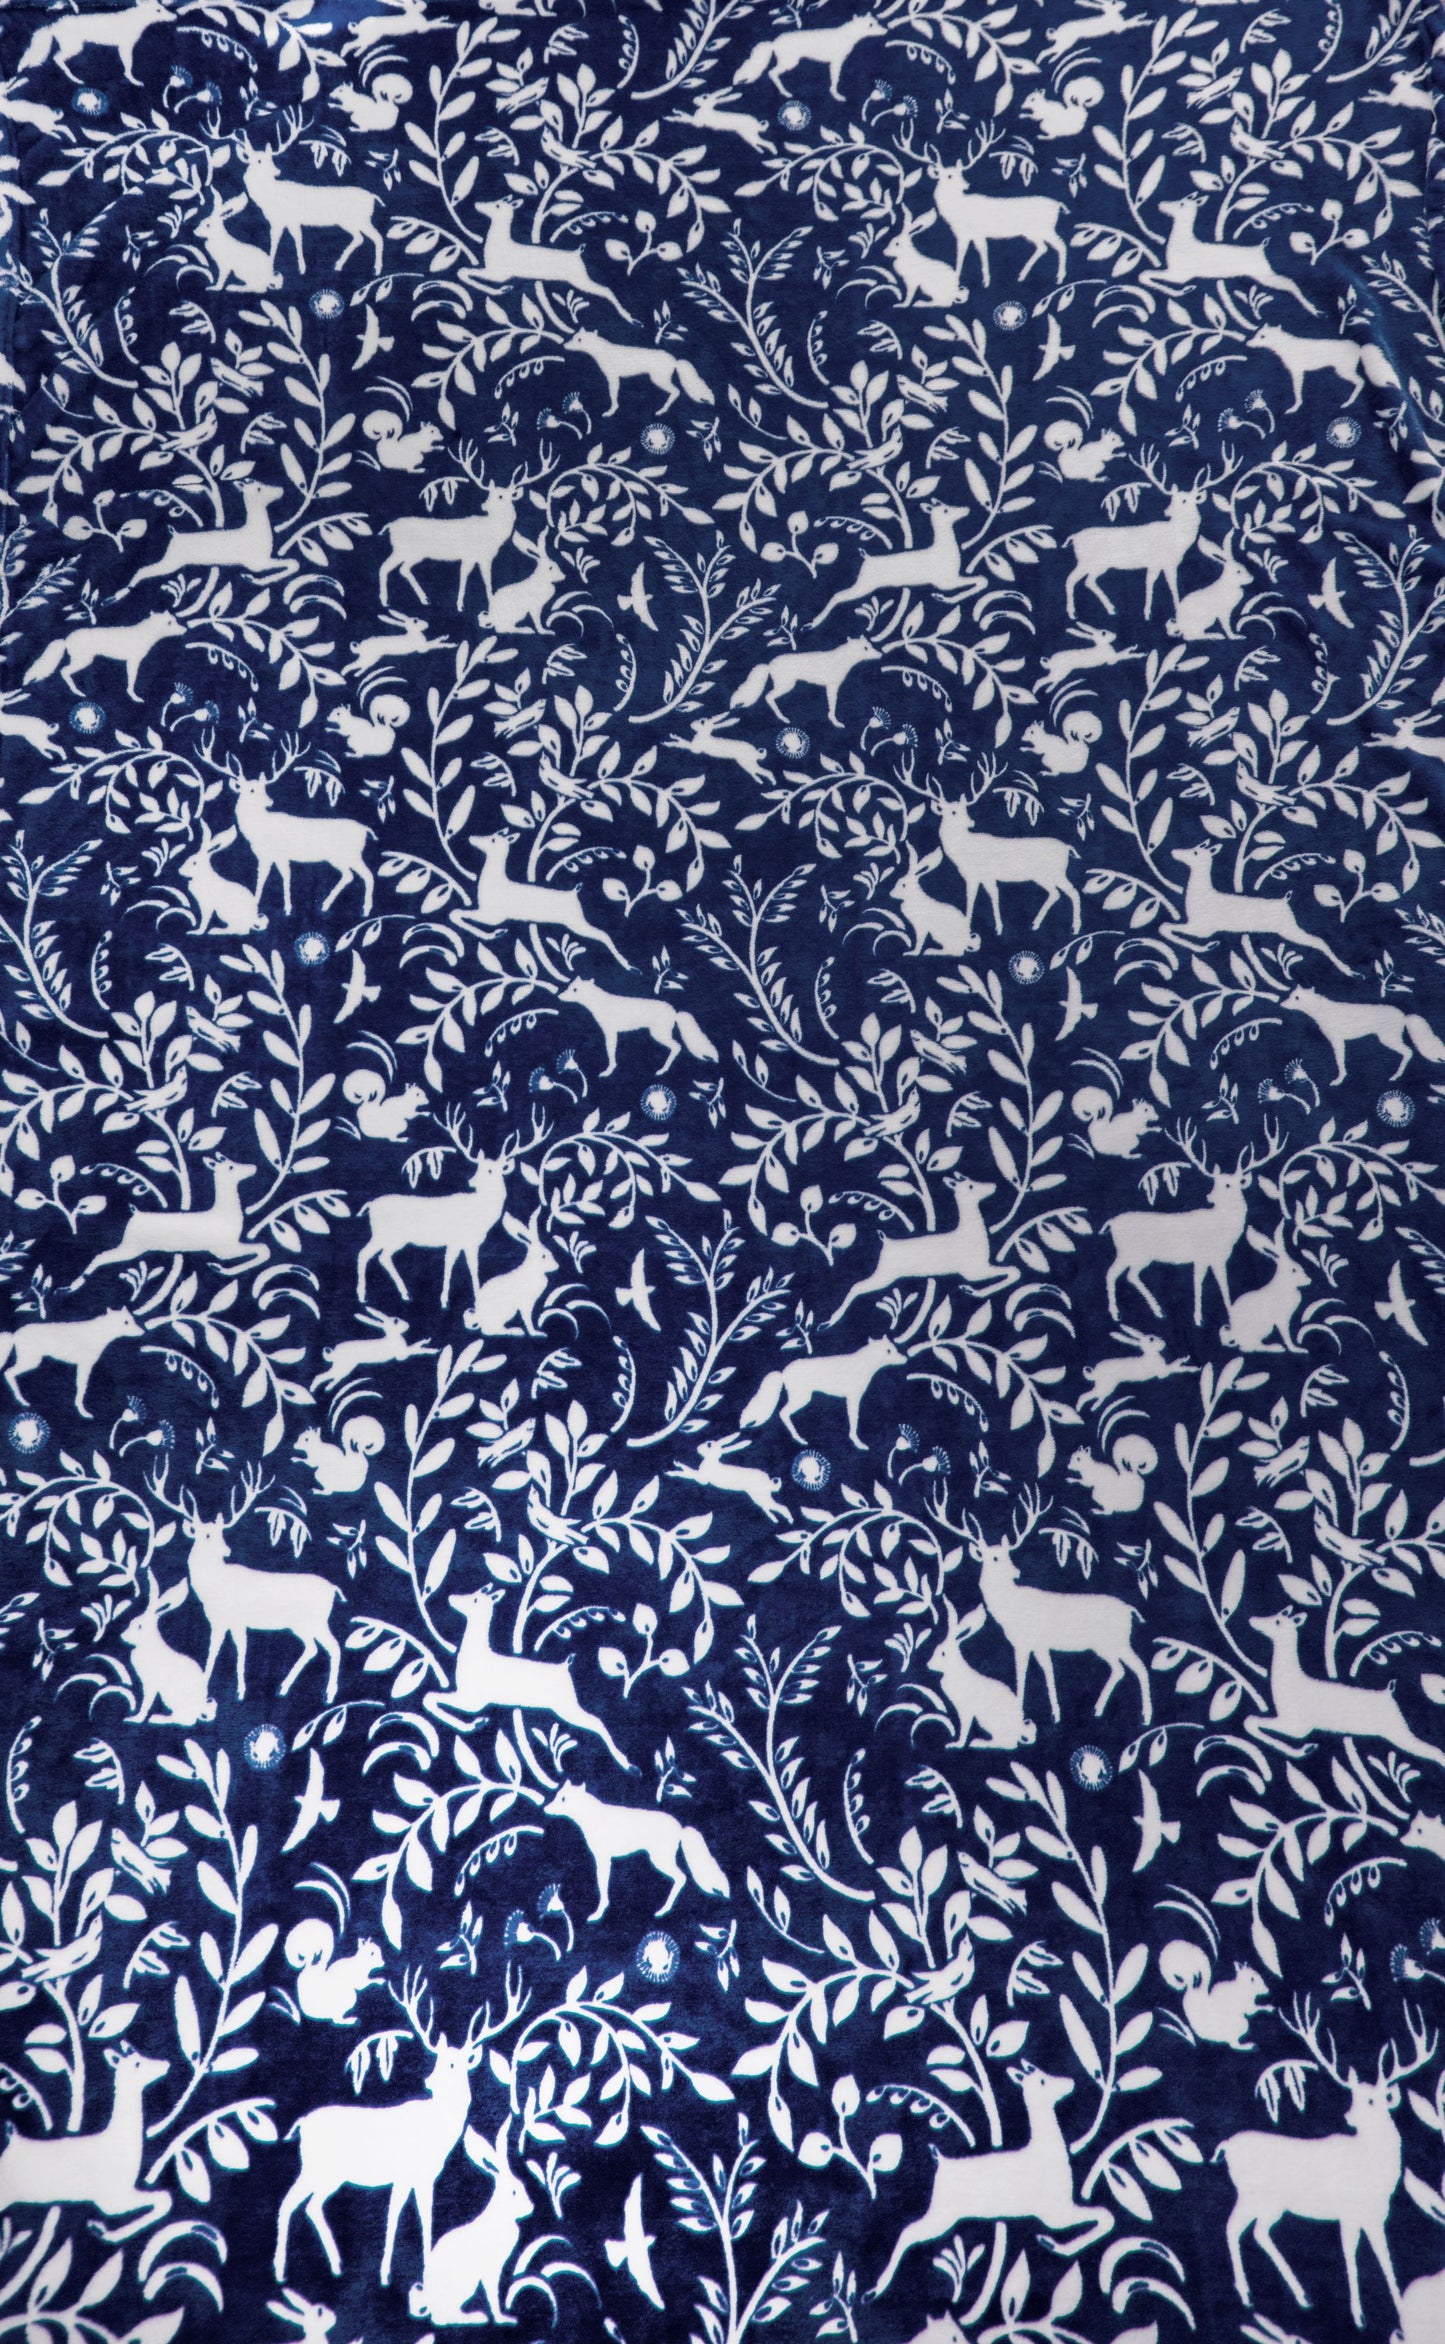 Woodland Animal Supersoft Throw in Navy Blue